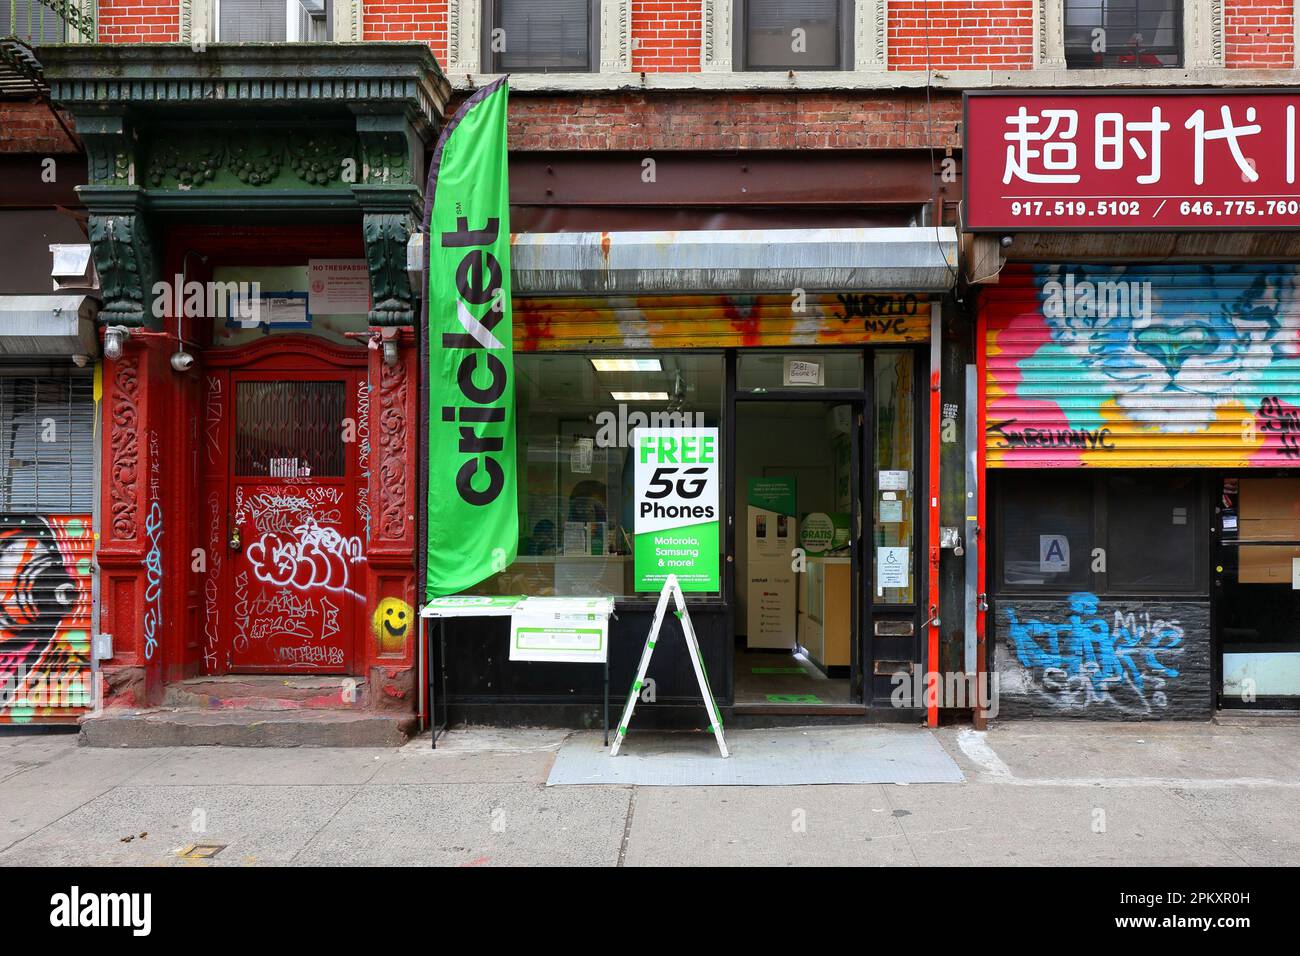 A Cricket Wireless prepaid cell phone wireless service provider in the Manhattan's Lower East Side in New York City. Stock Photo